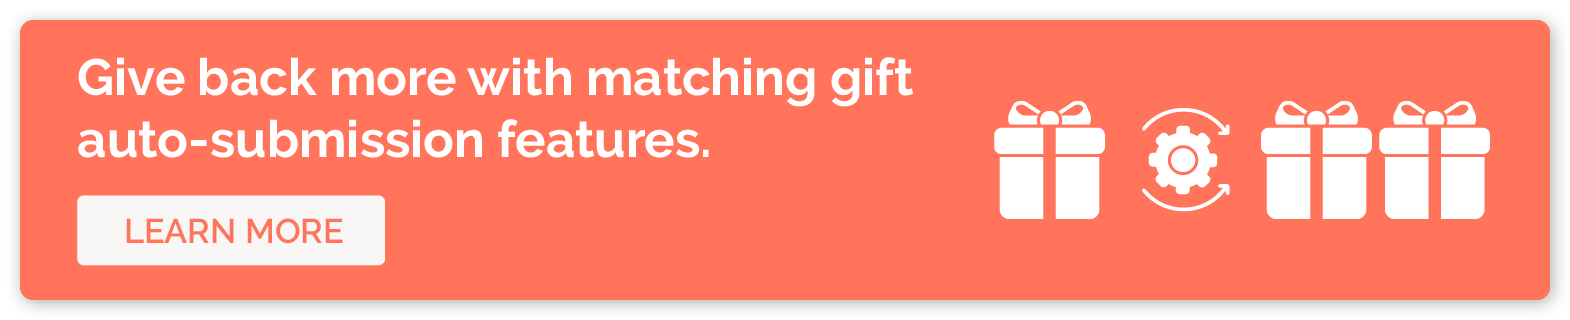 Click to learn more about how matching gift auto-submission increases generosity for employee giving campaigns.